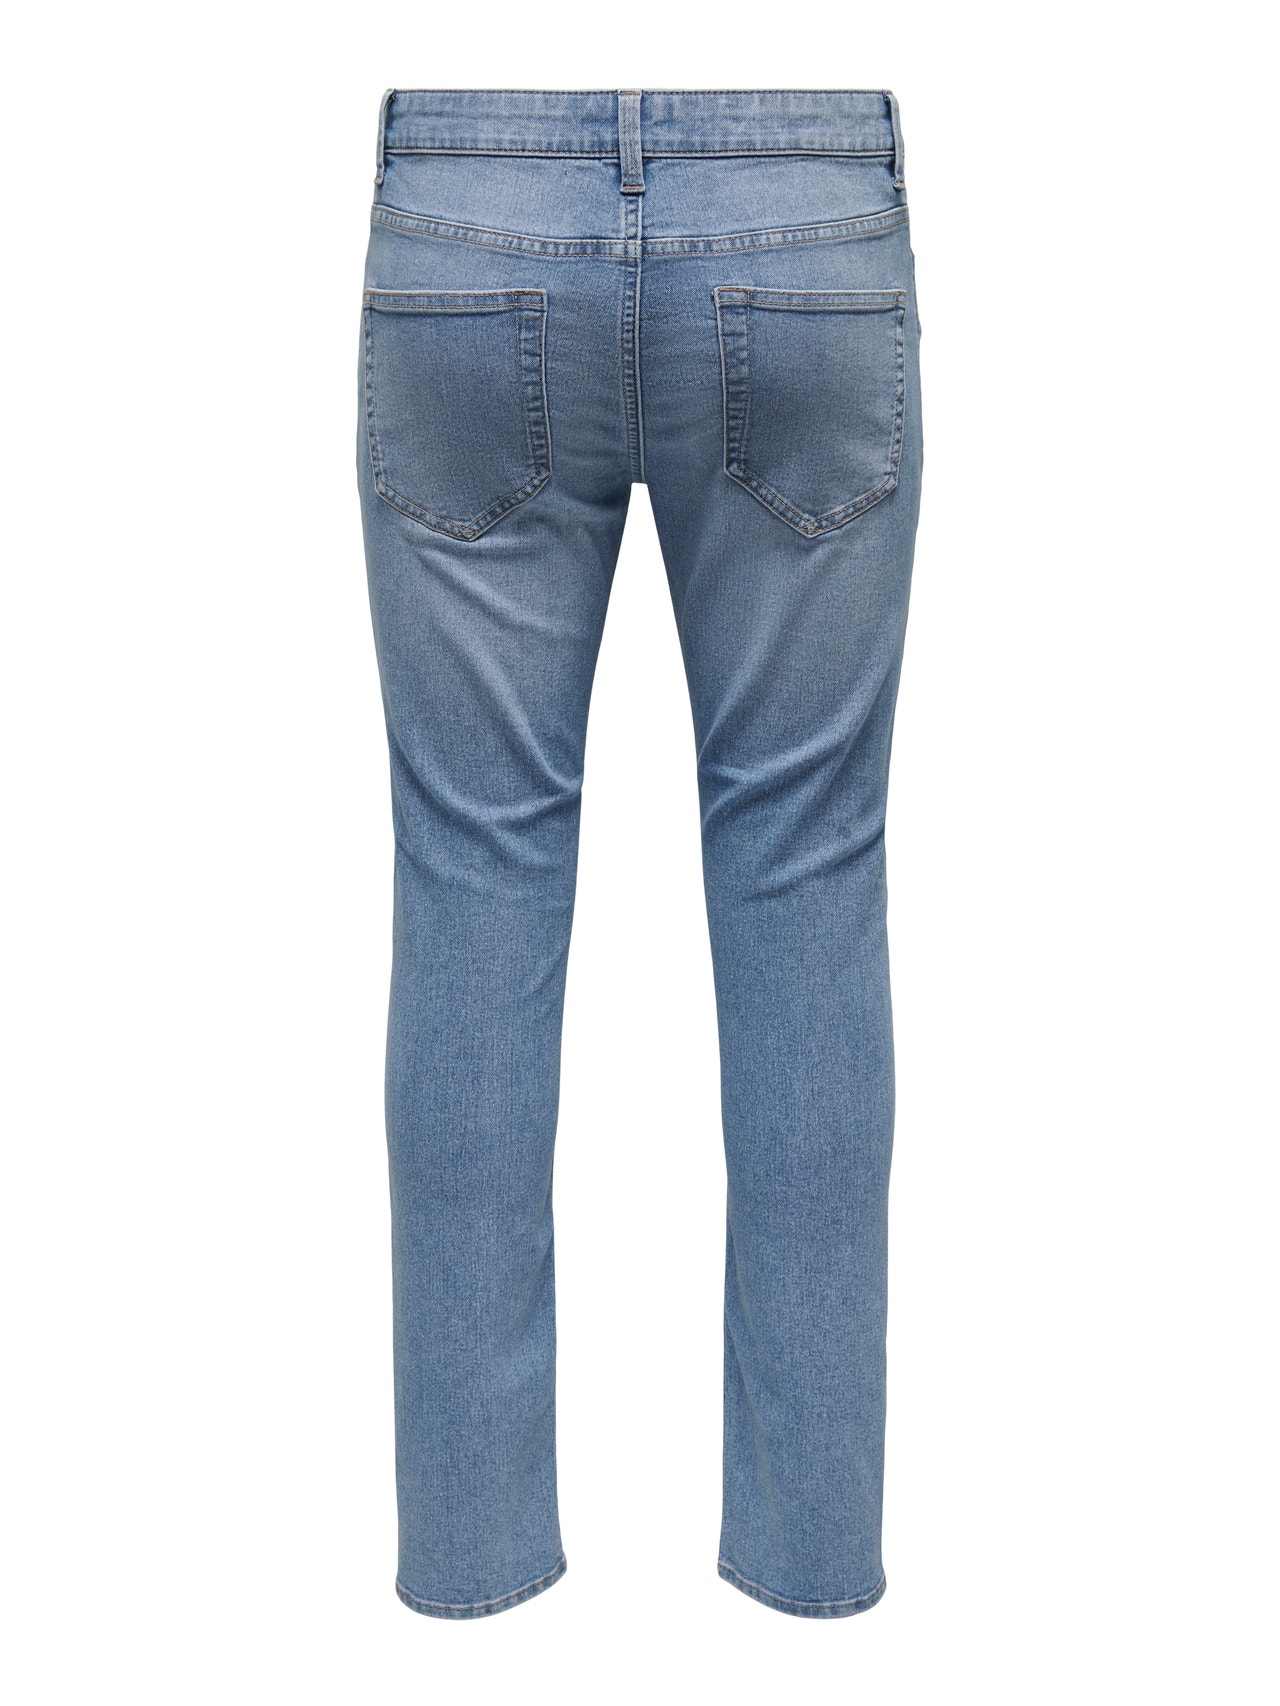 ONLY & SONS Jeans Slim Fit Taille moyenne -Light Blue Denim - 22027899